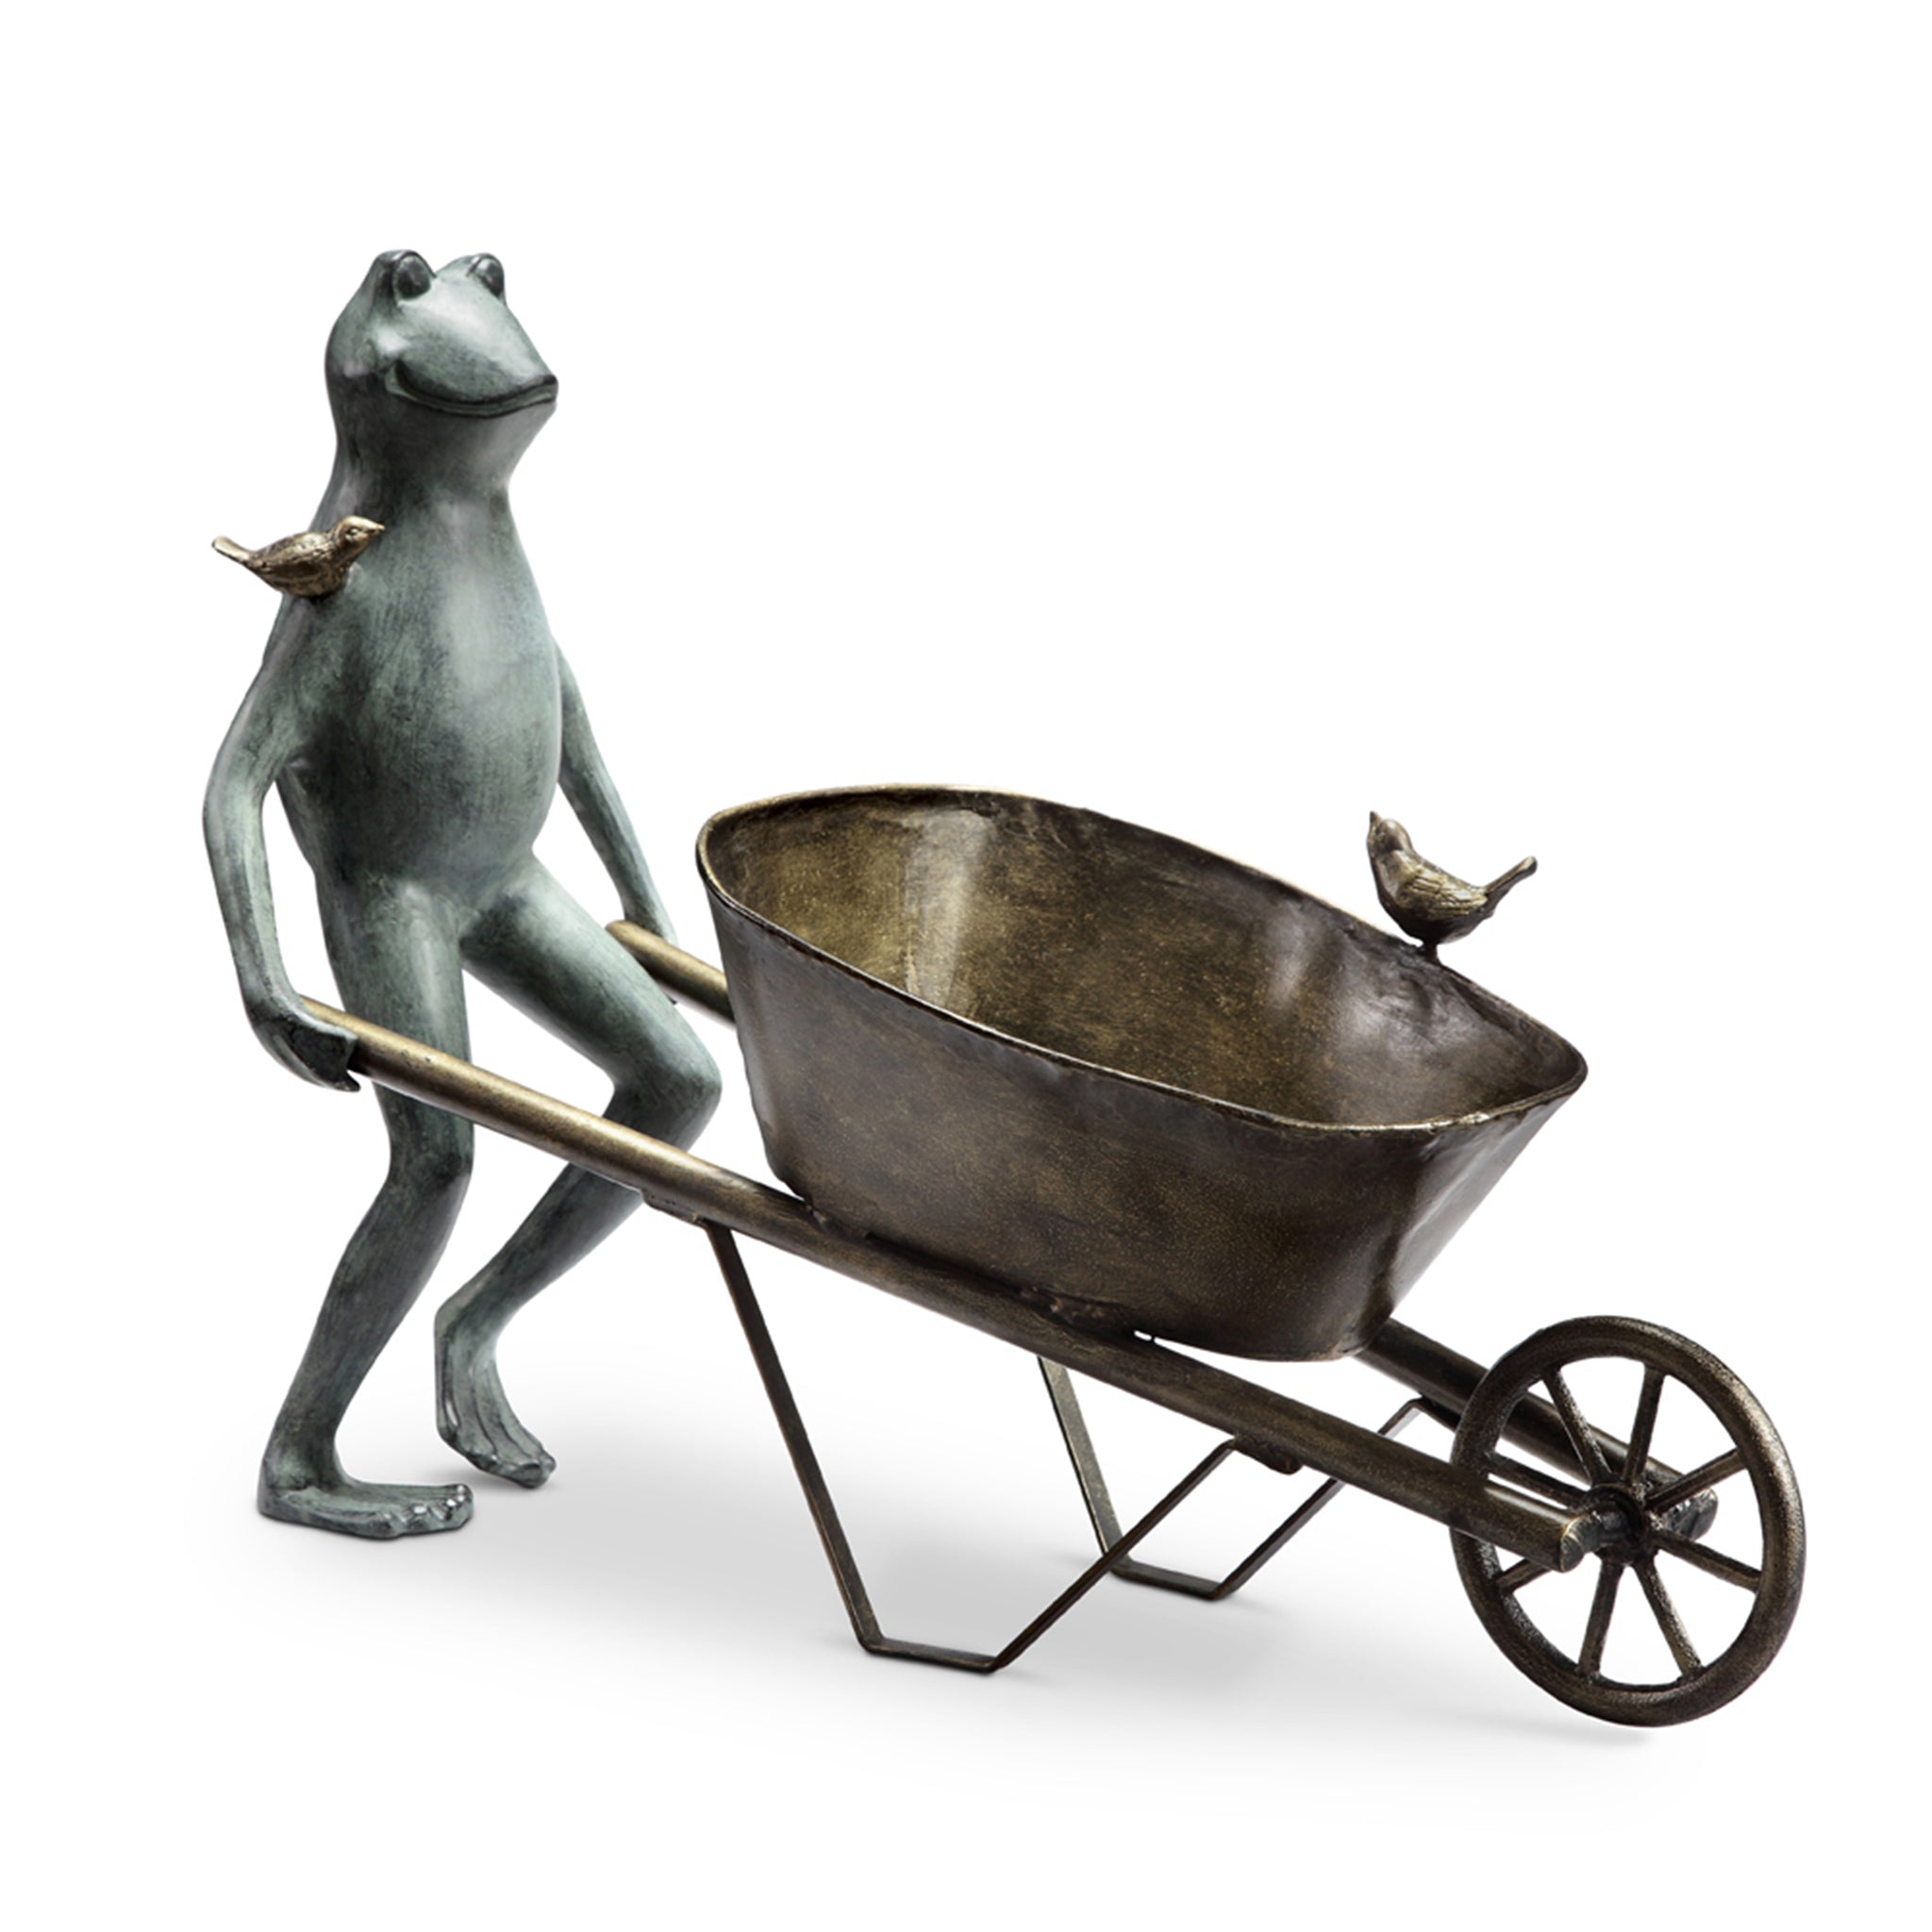 Frog and Bird Plant Holder #2